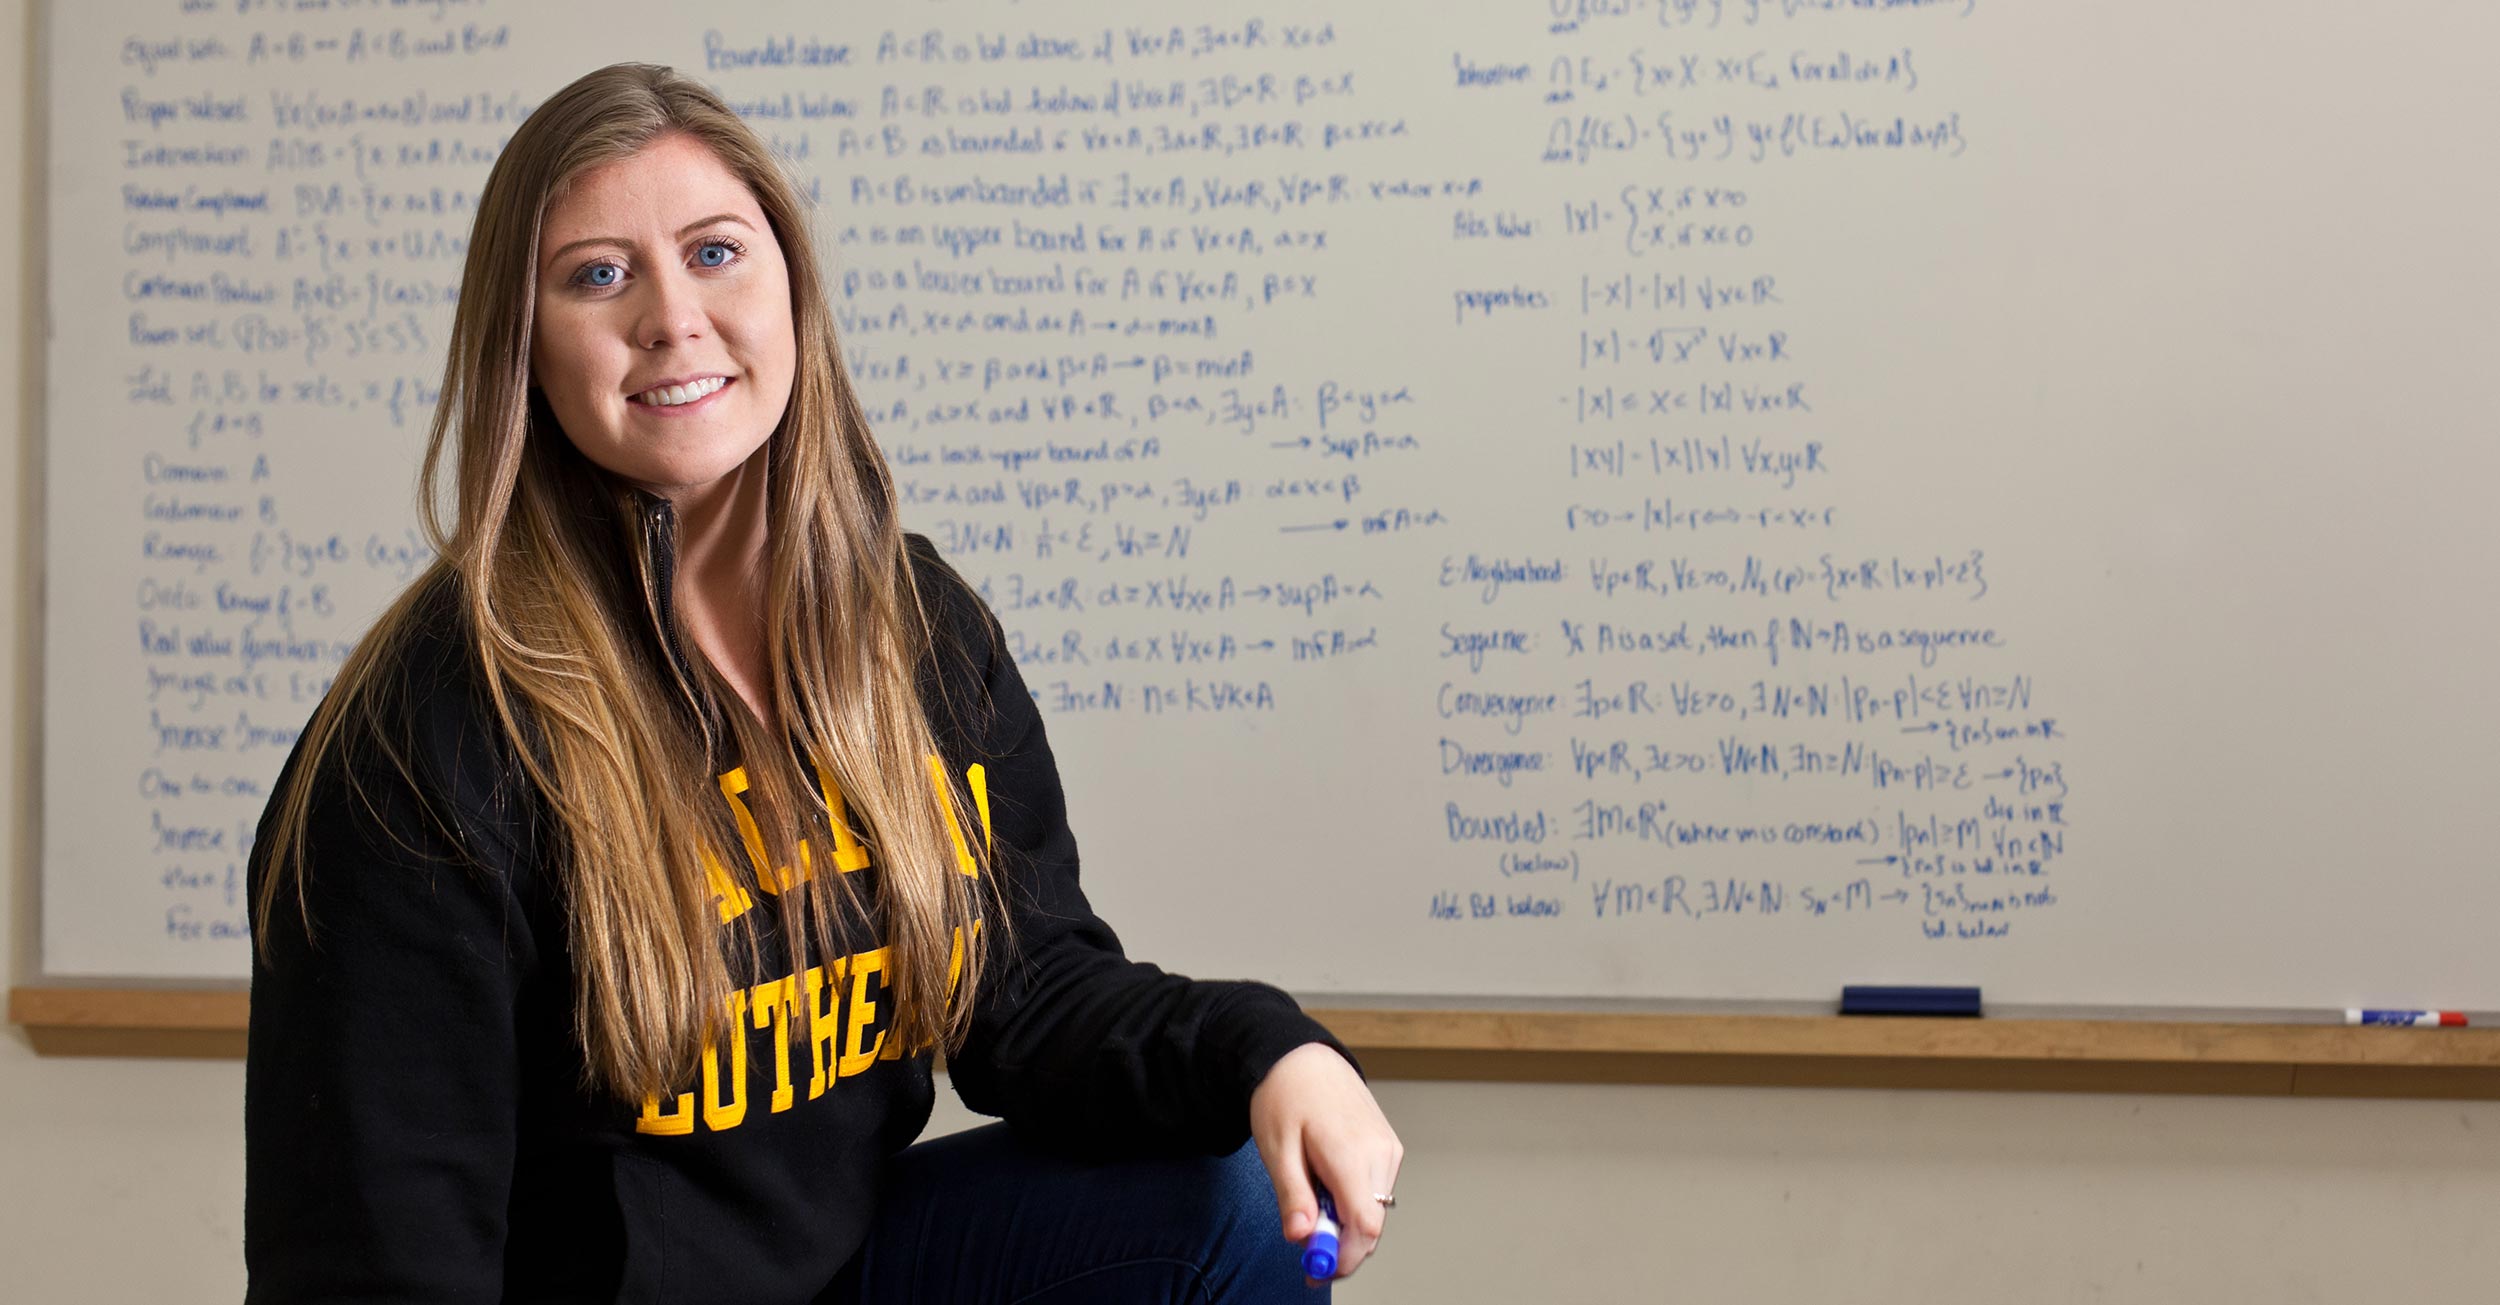 PLU-student-Chaney-Skadsen-poses-for-a-photo-in-front-of-a-chalkboard